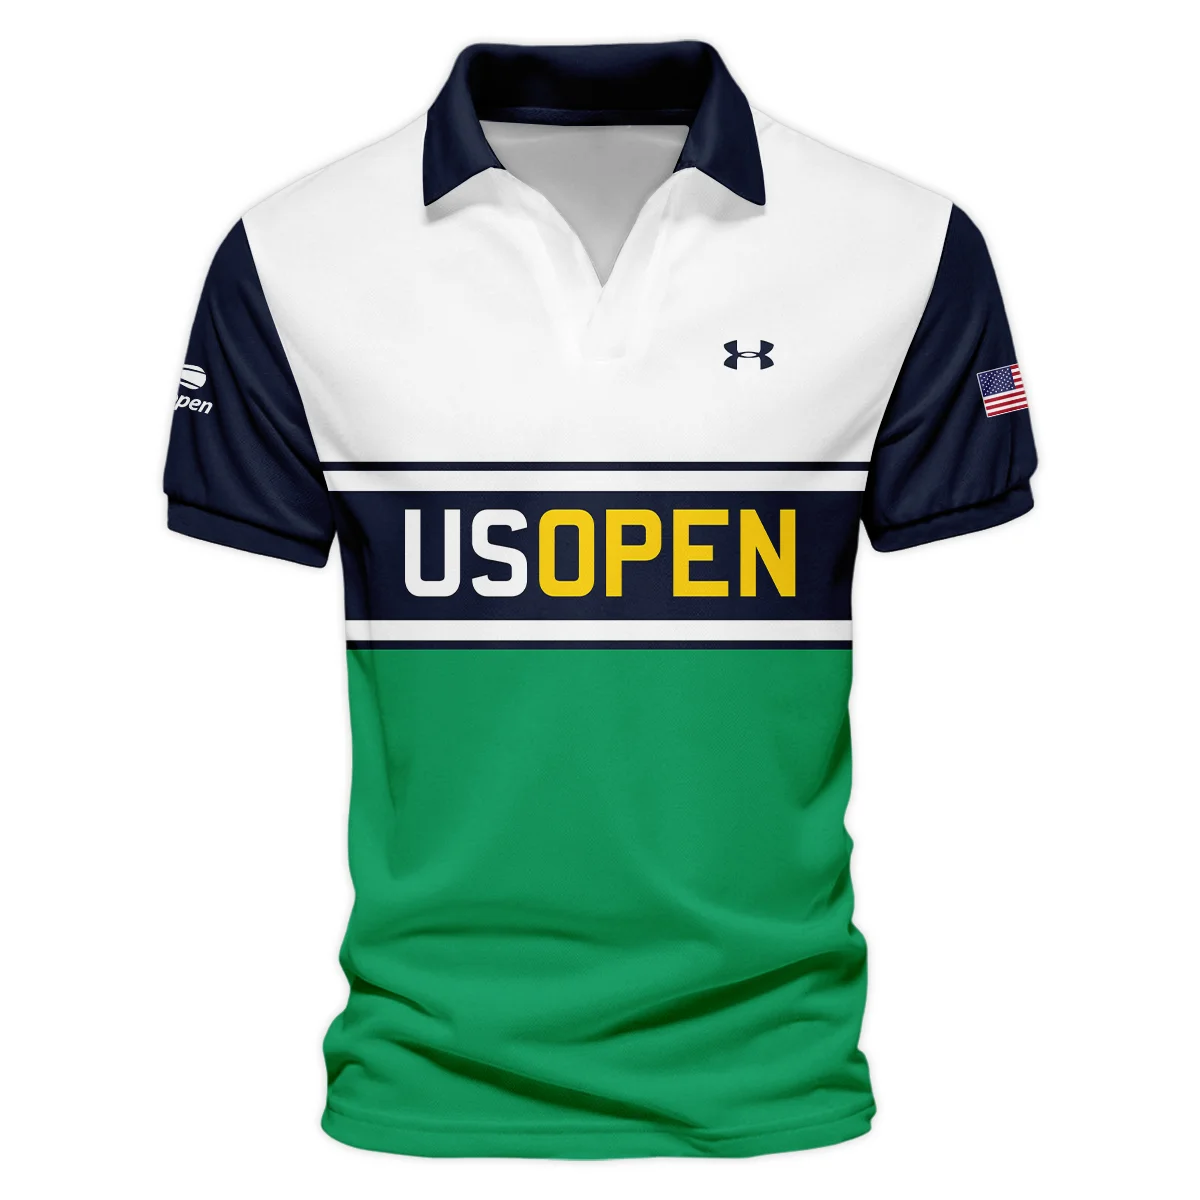 Tennis Love Sport Mix Color US Open Tennis Champions Under Armour Vneck Polo Shirt Style Classic Polo Shirt For Men